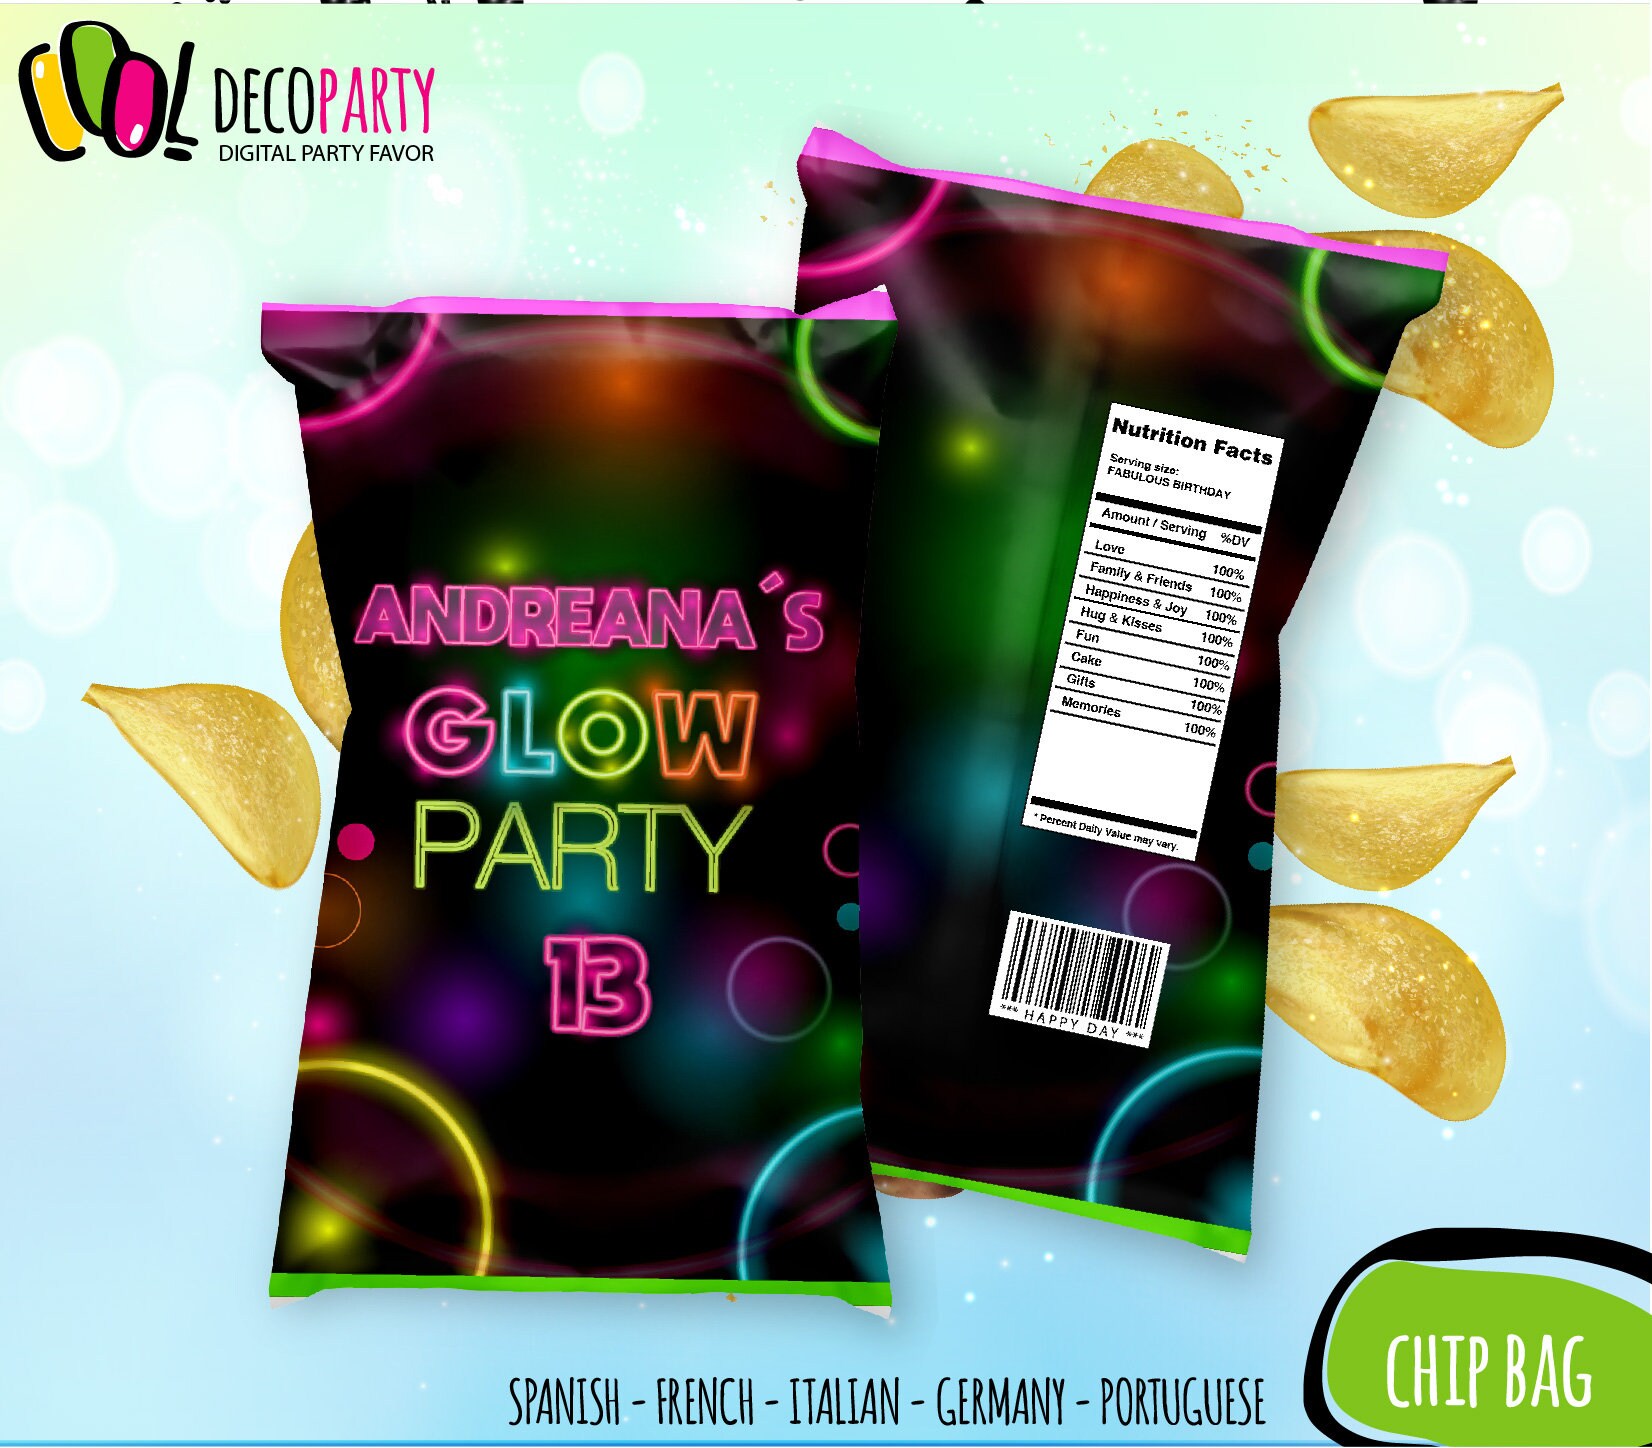 24 Pieces Glow in The Dark Party Bags Neon Themed Party Favors Bags Glow in  The Dark Kraft Treat Bags Candy Bags Goodie Bags for Glow in The Dark